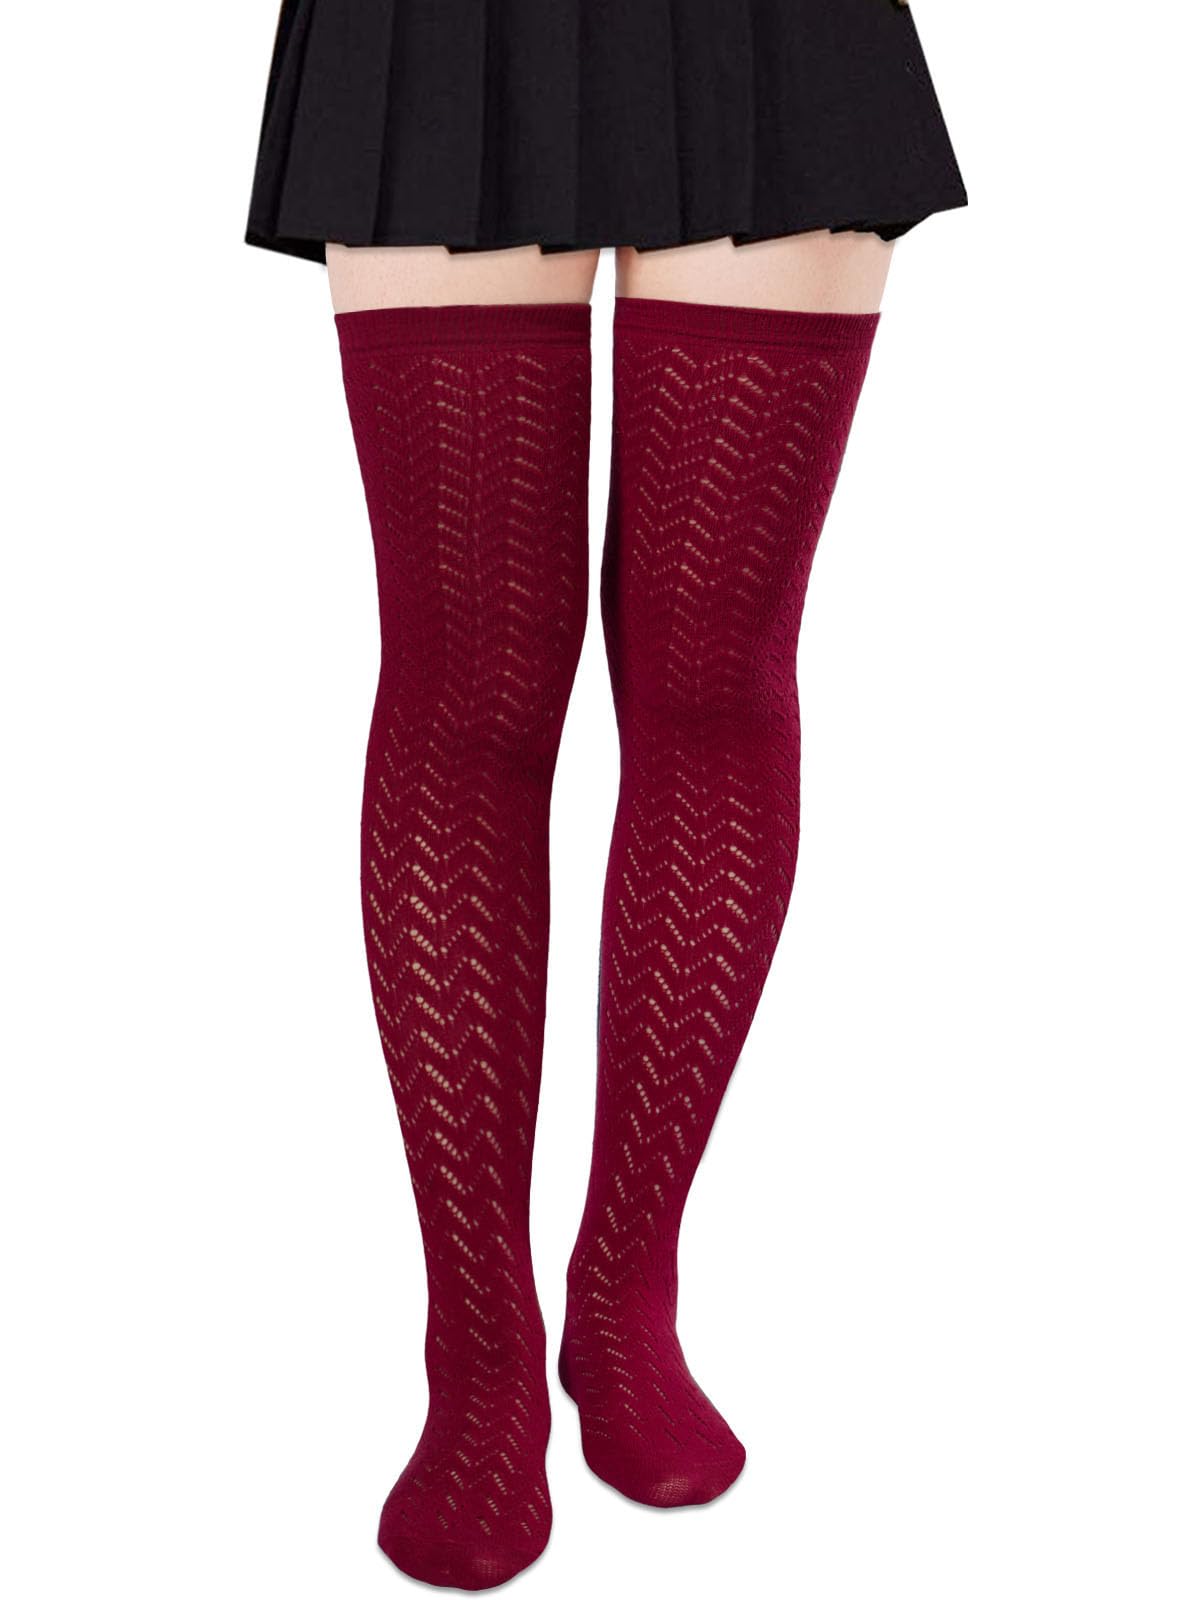 Cotton Thigh High Socks with Hollowing Mesh - Wine Red - Moon Wood